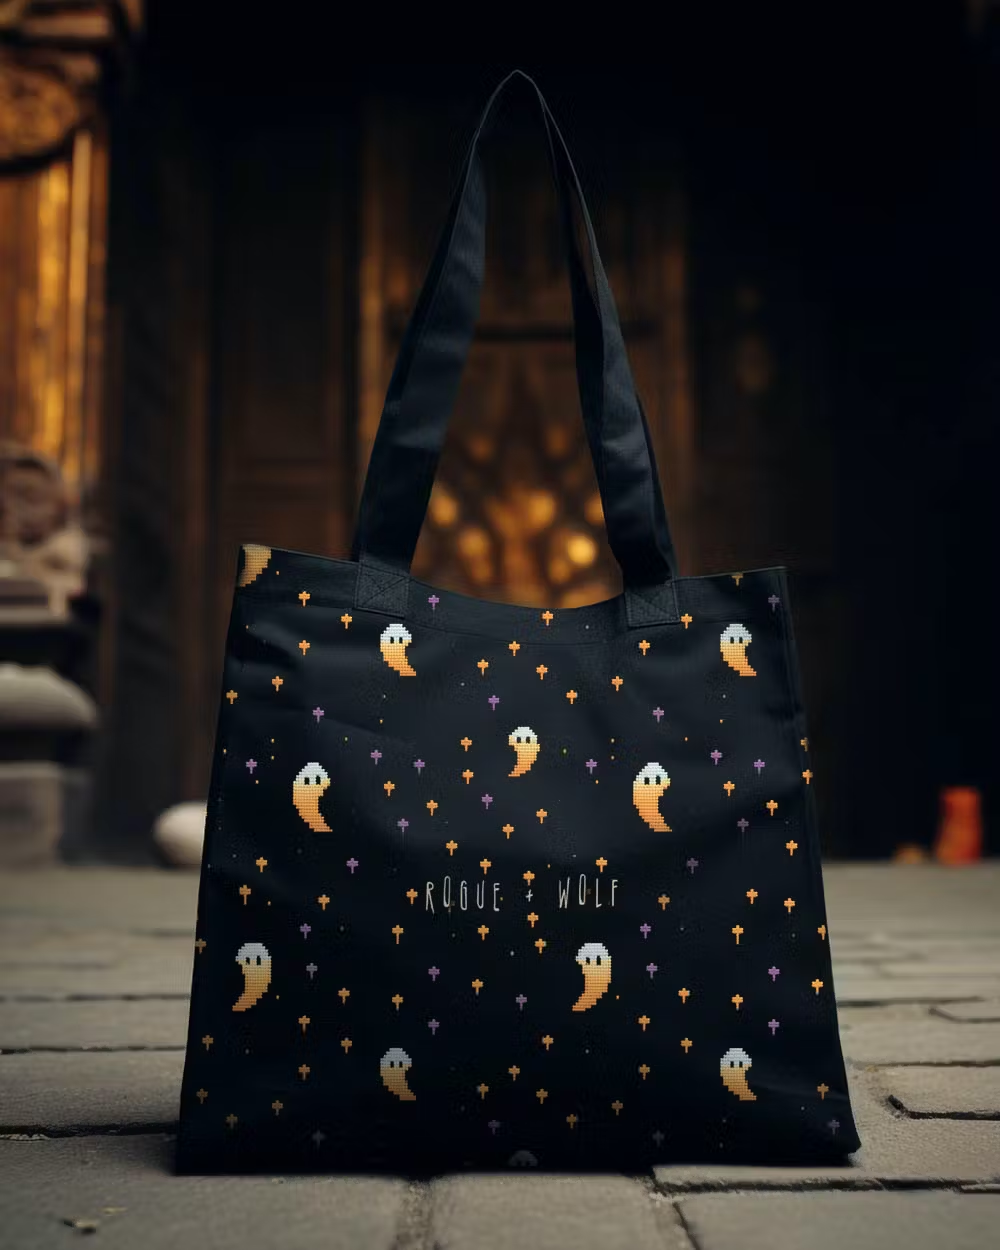 Stargazin' Spectres Vegan Cotton Tote for Women - Dark Academia Witchy Large Foldable Bag for Uni, Work, Grocery, Goth Gifts